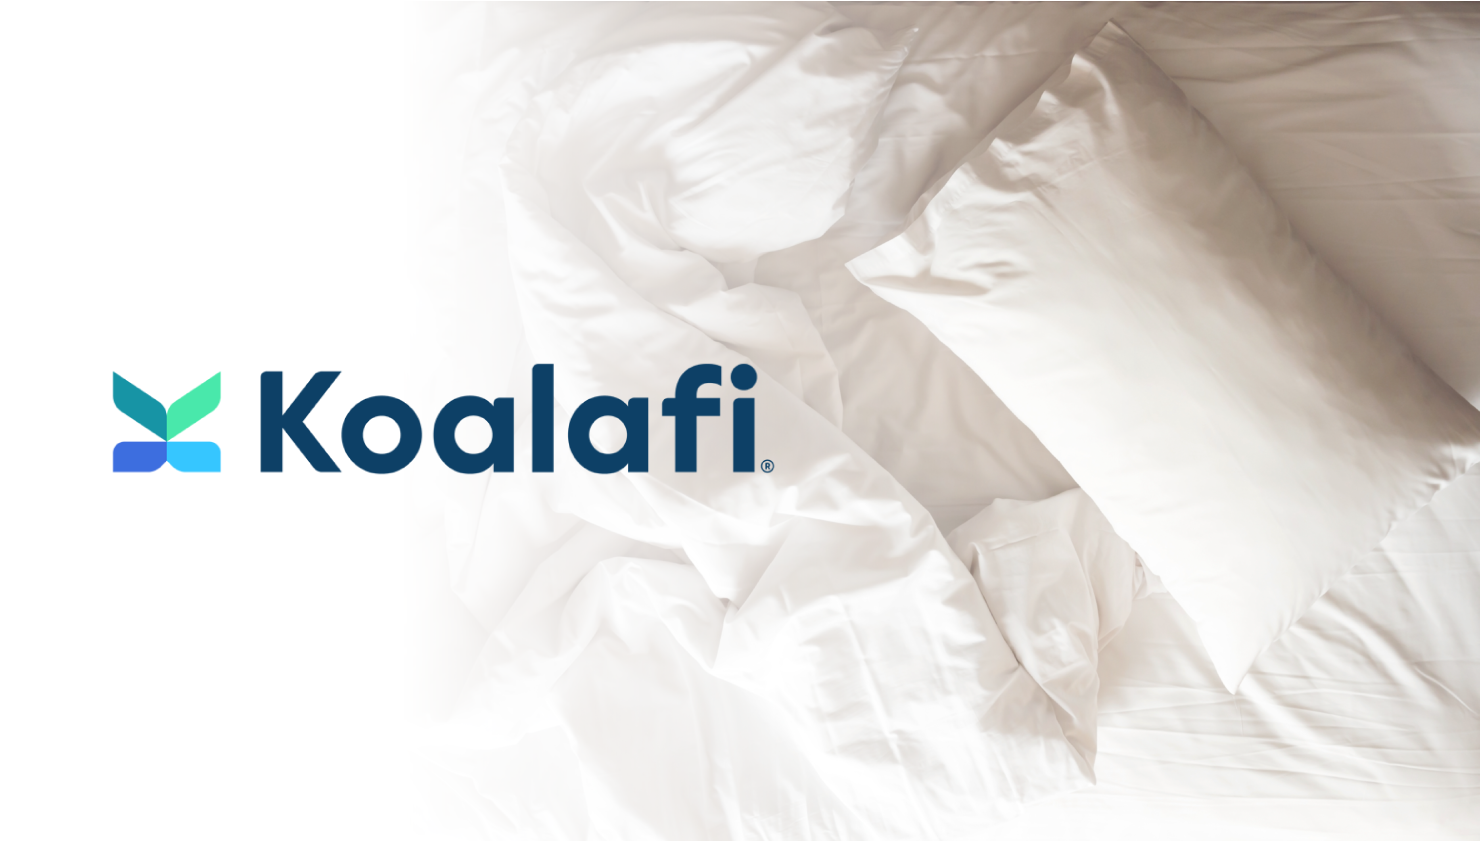 Koalafi logo over image of a unmade bed